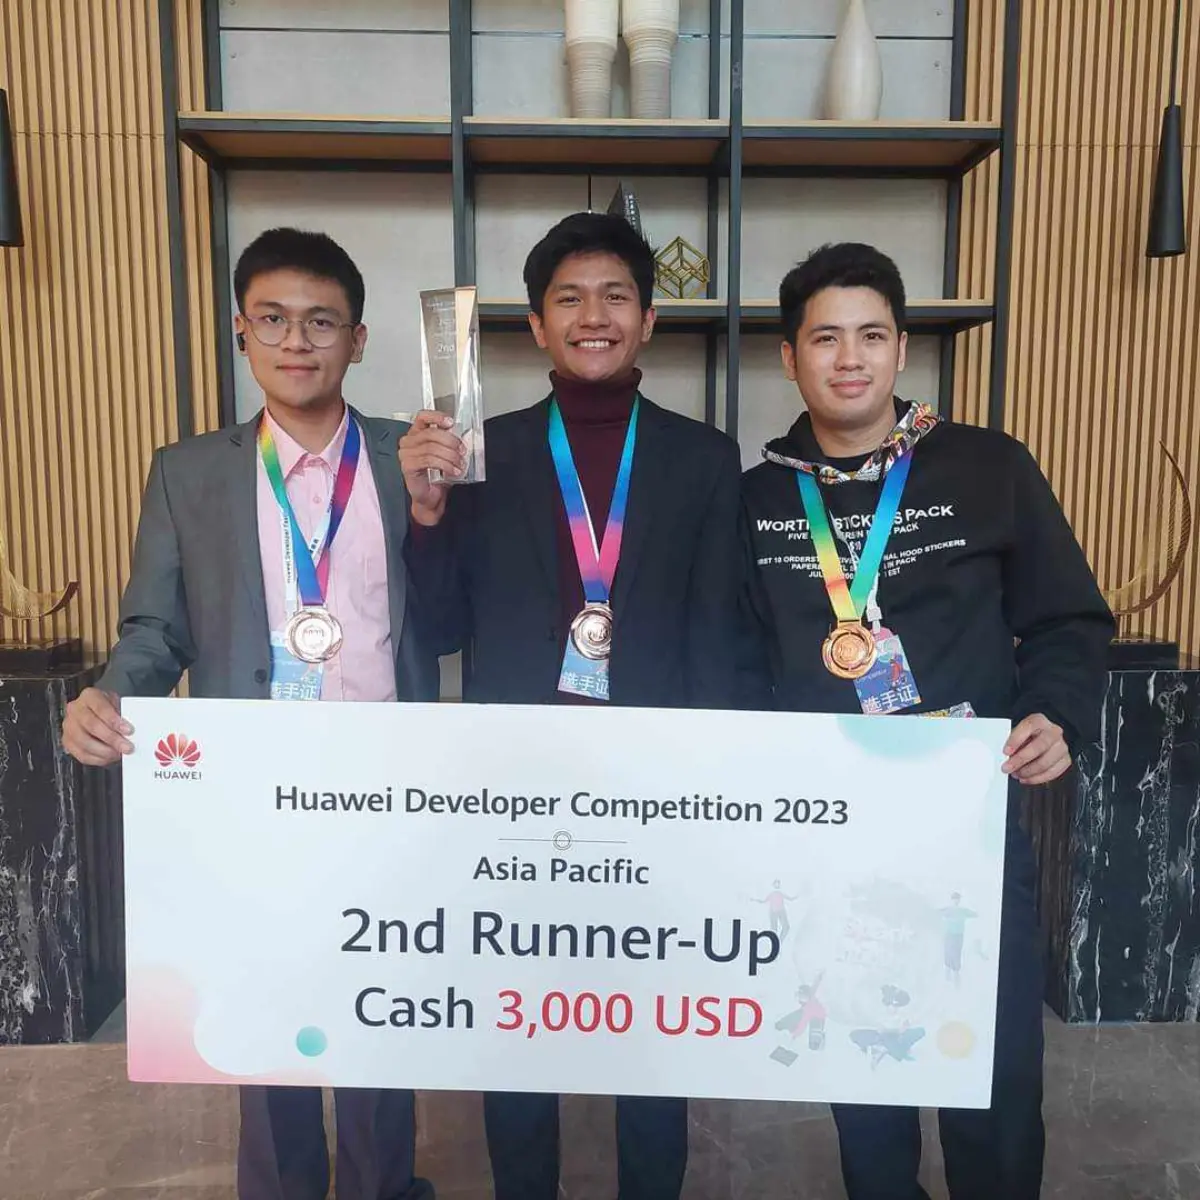 STIers Win Big in Global Huawei Competition